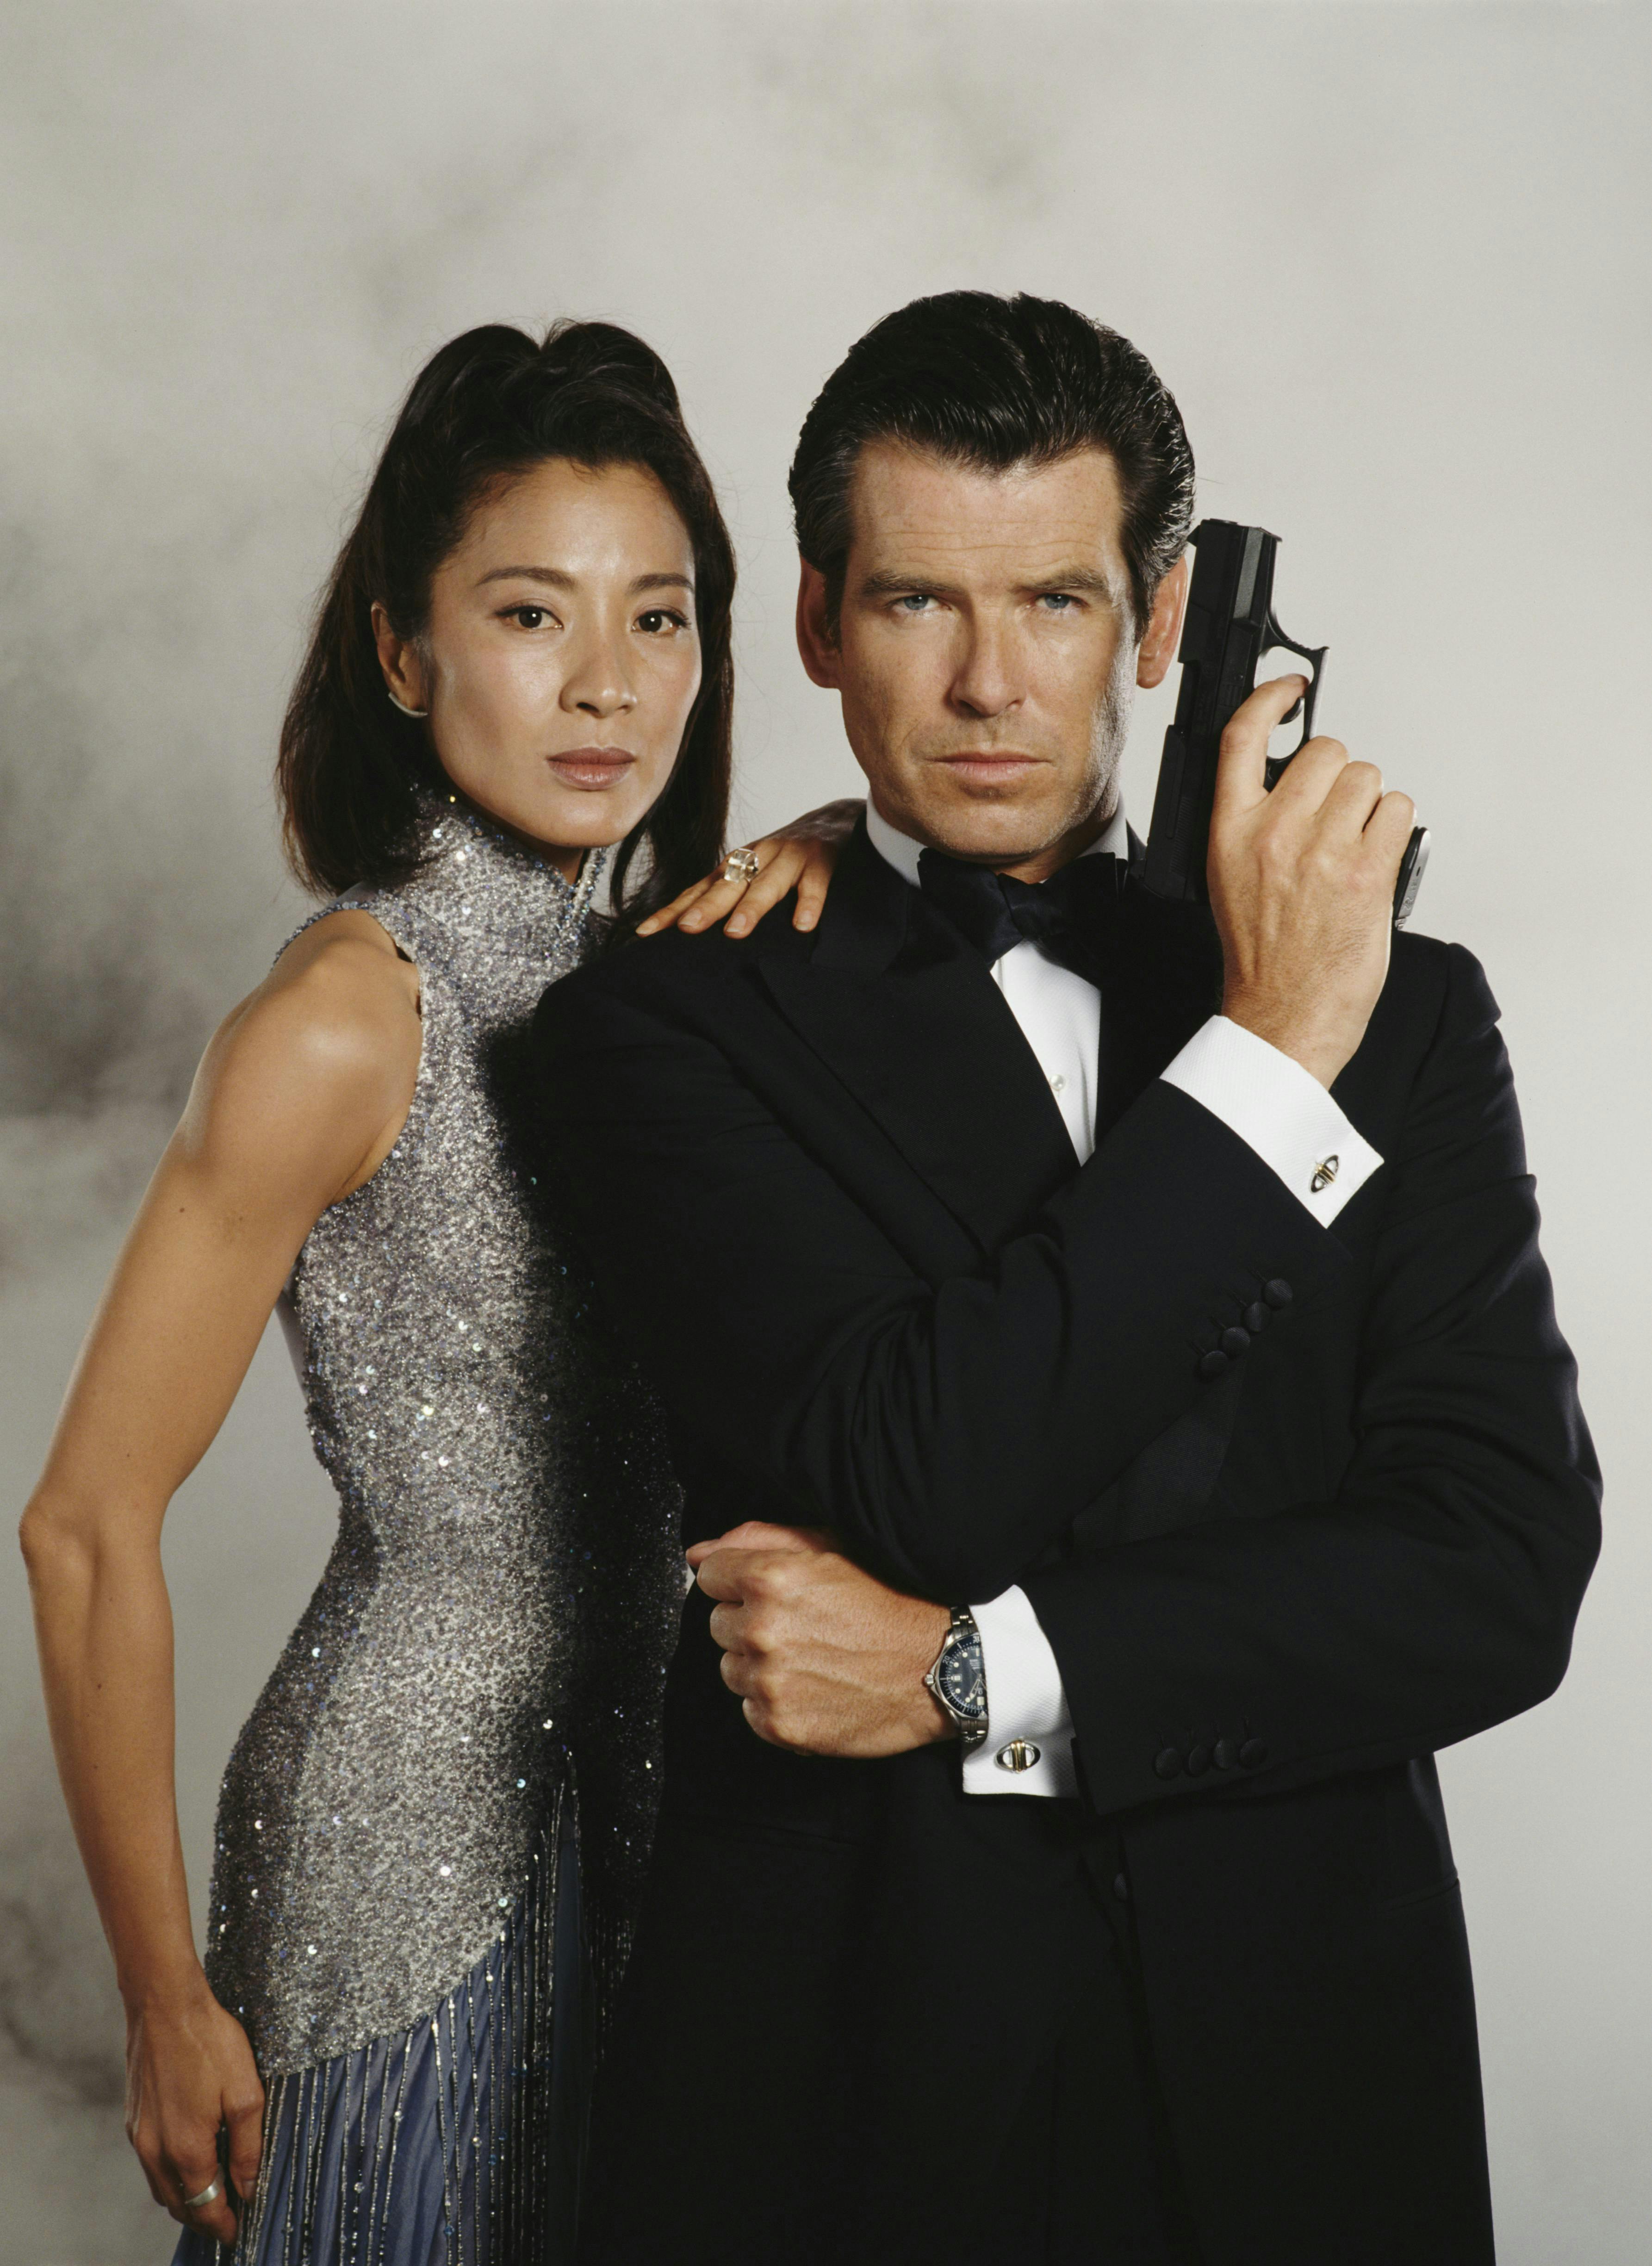 Michelle Yeoh as Wai Lin and Pierce Brosnan as James Bond in 'Tomorrow Never Dies'